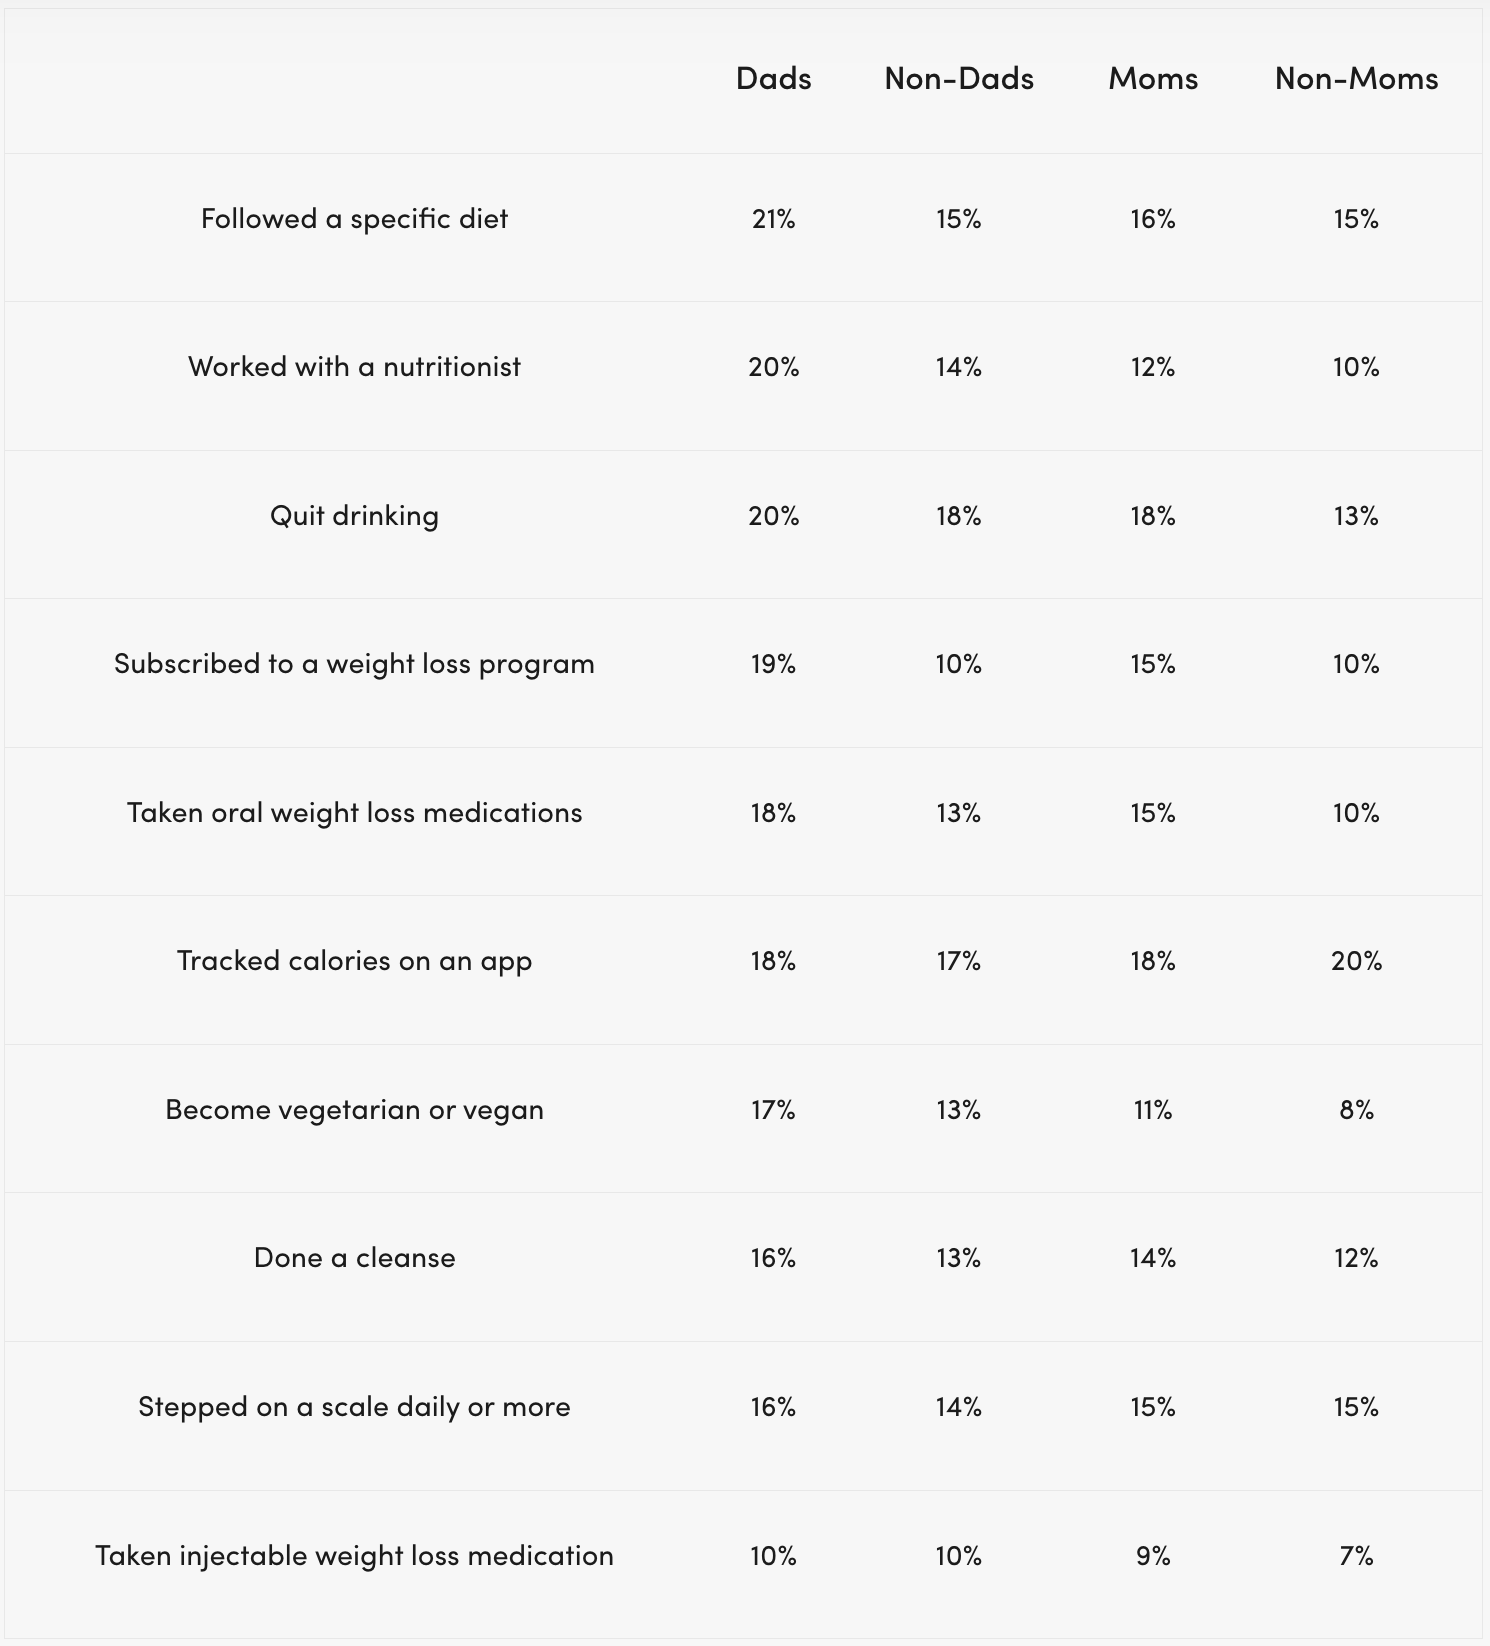 Table showing Ways dads are feeling confident, healthy, attractive, etc.